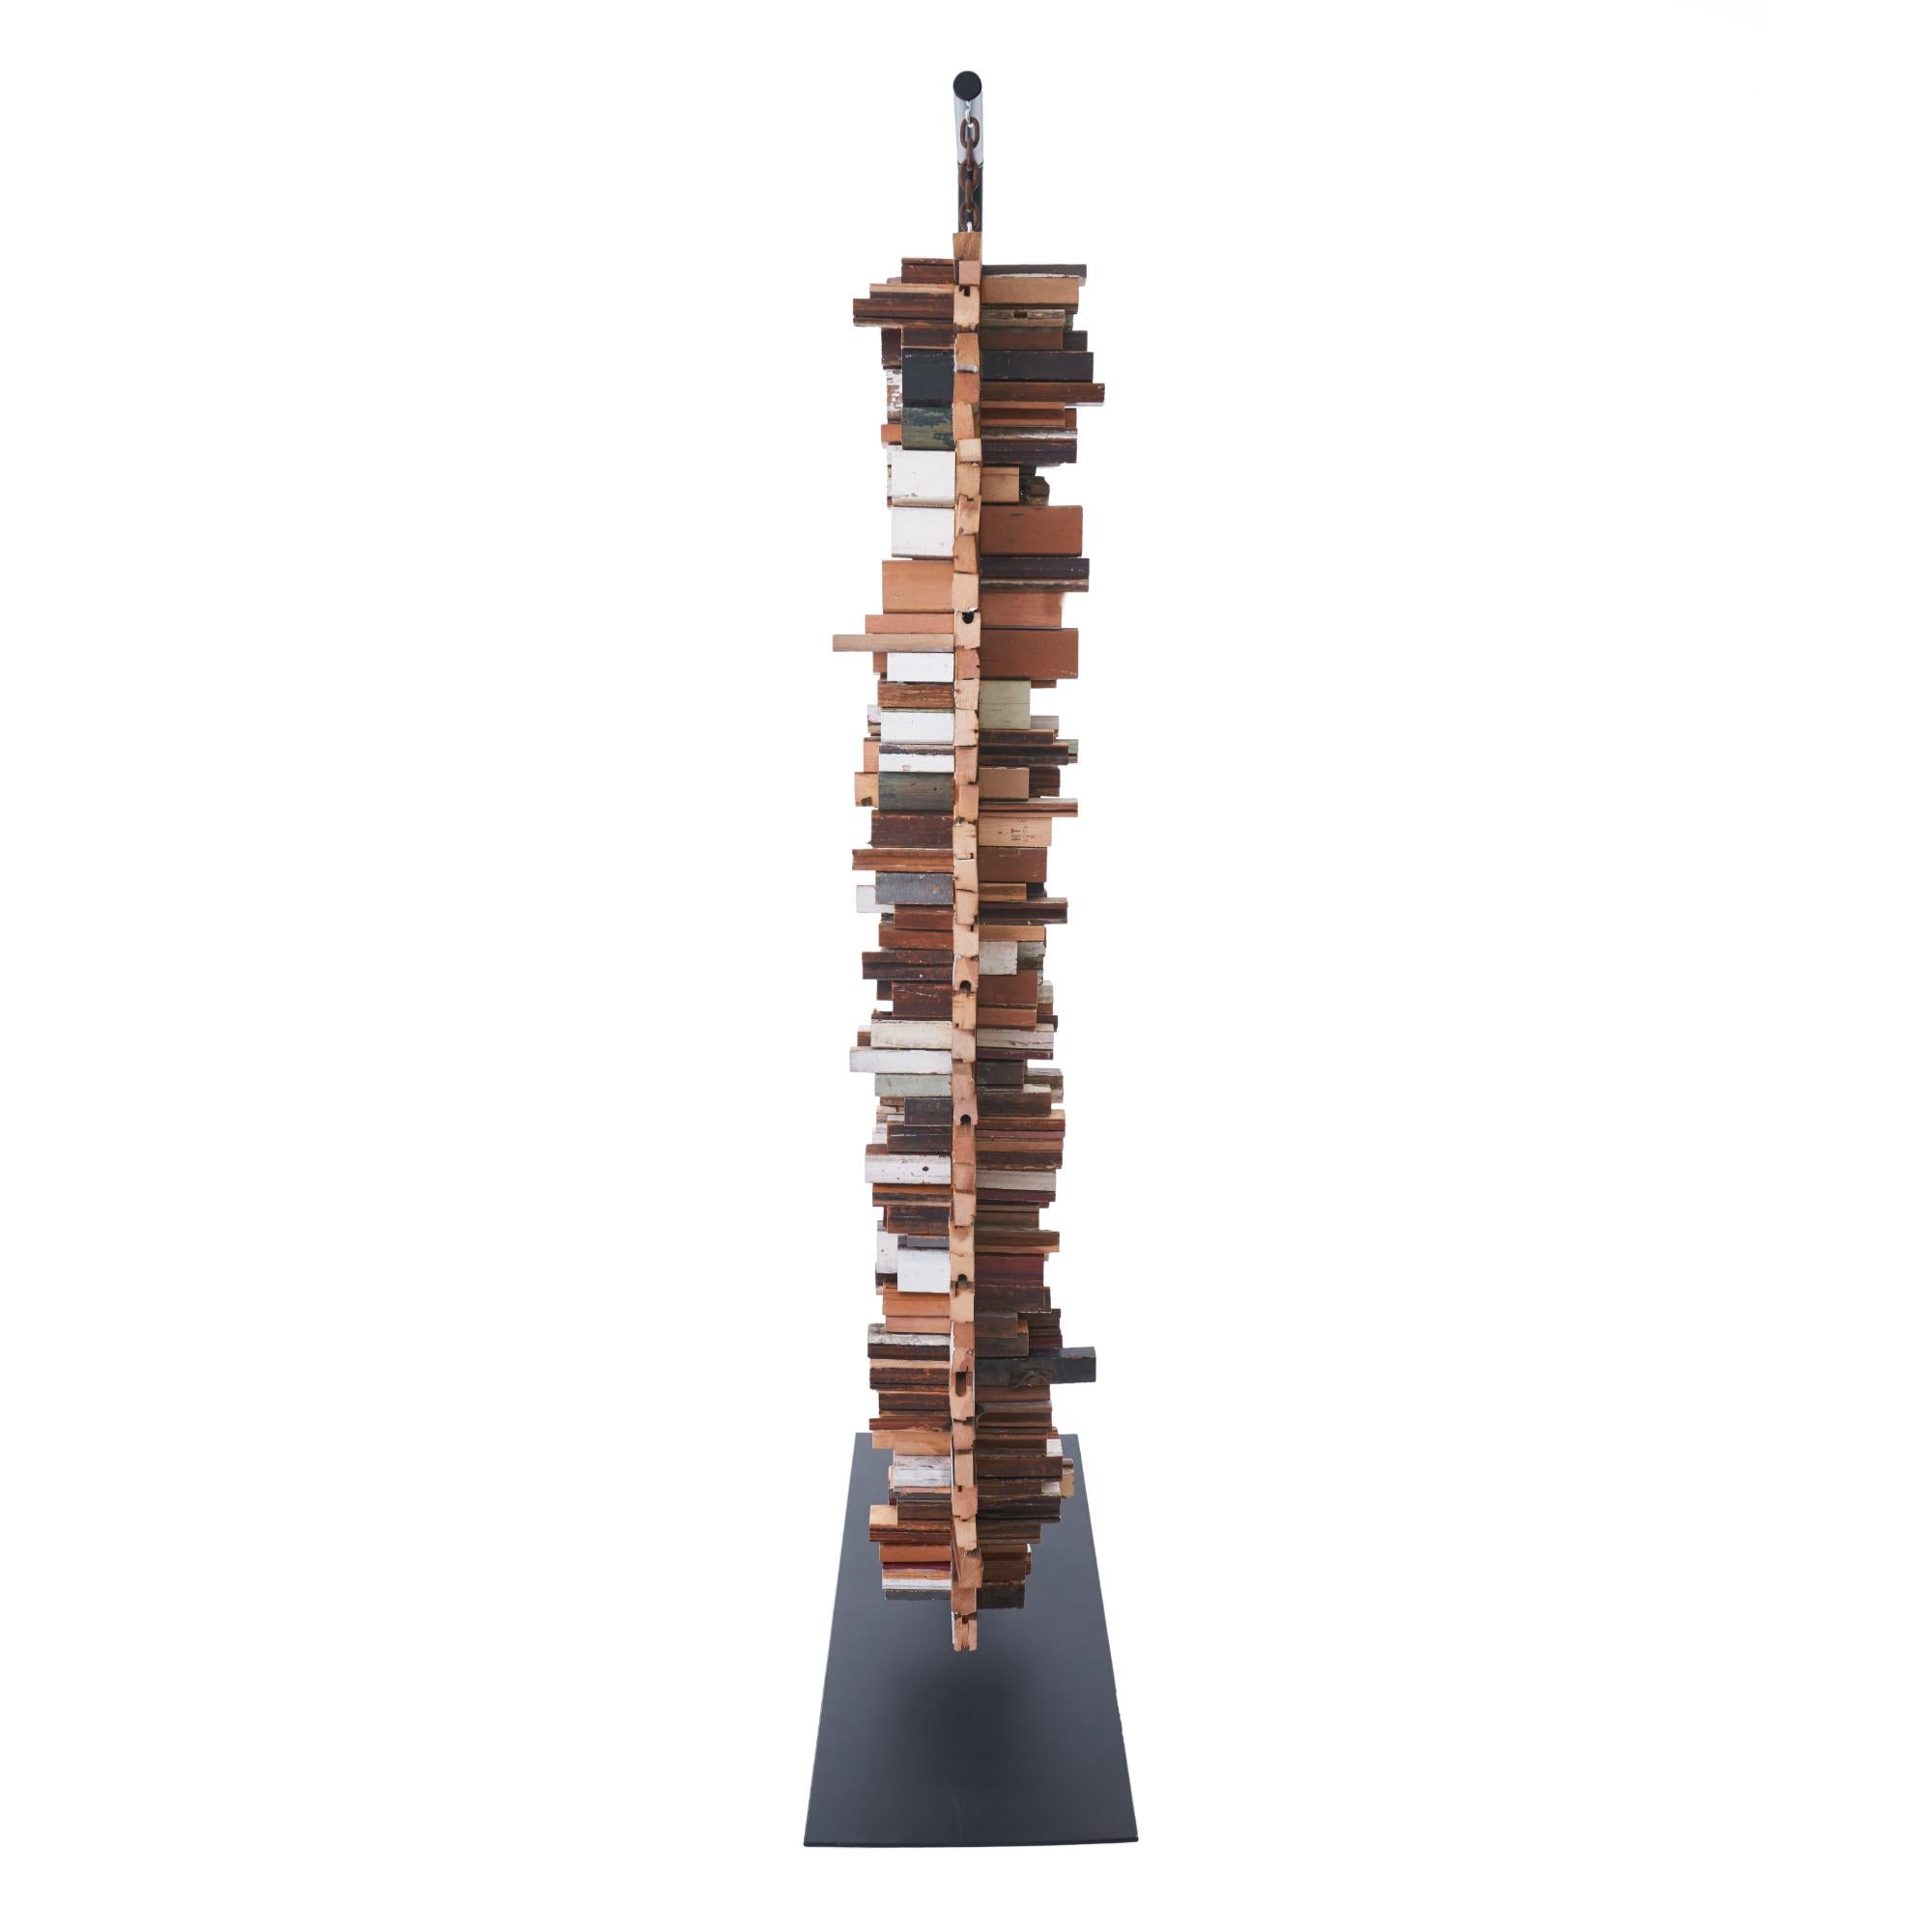 American Suspended Wood TOTEM Sculpture by Michelle Peterson Albandoz For Sale